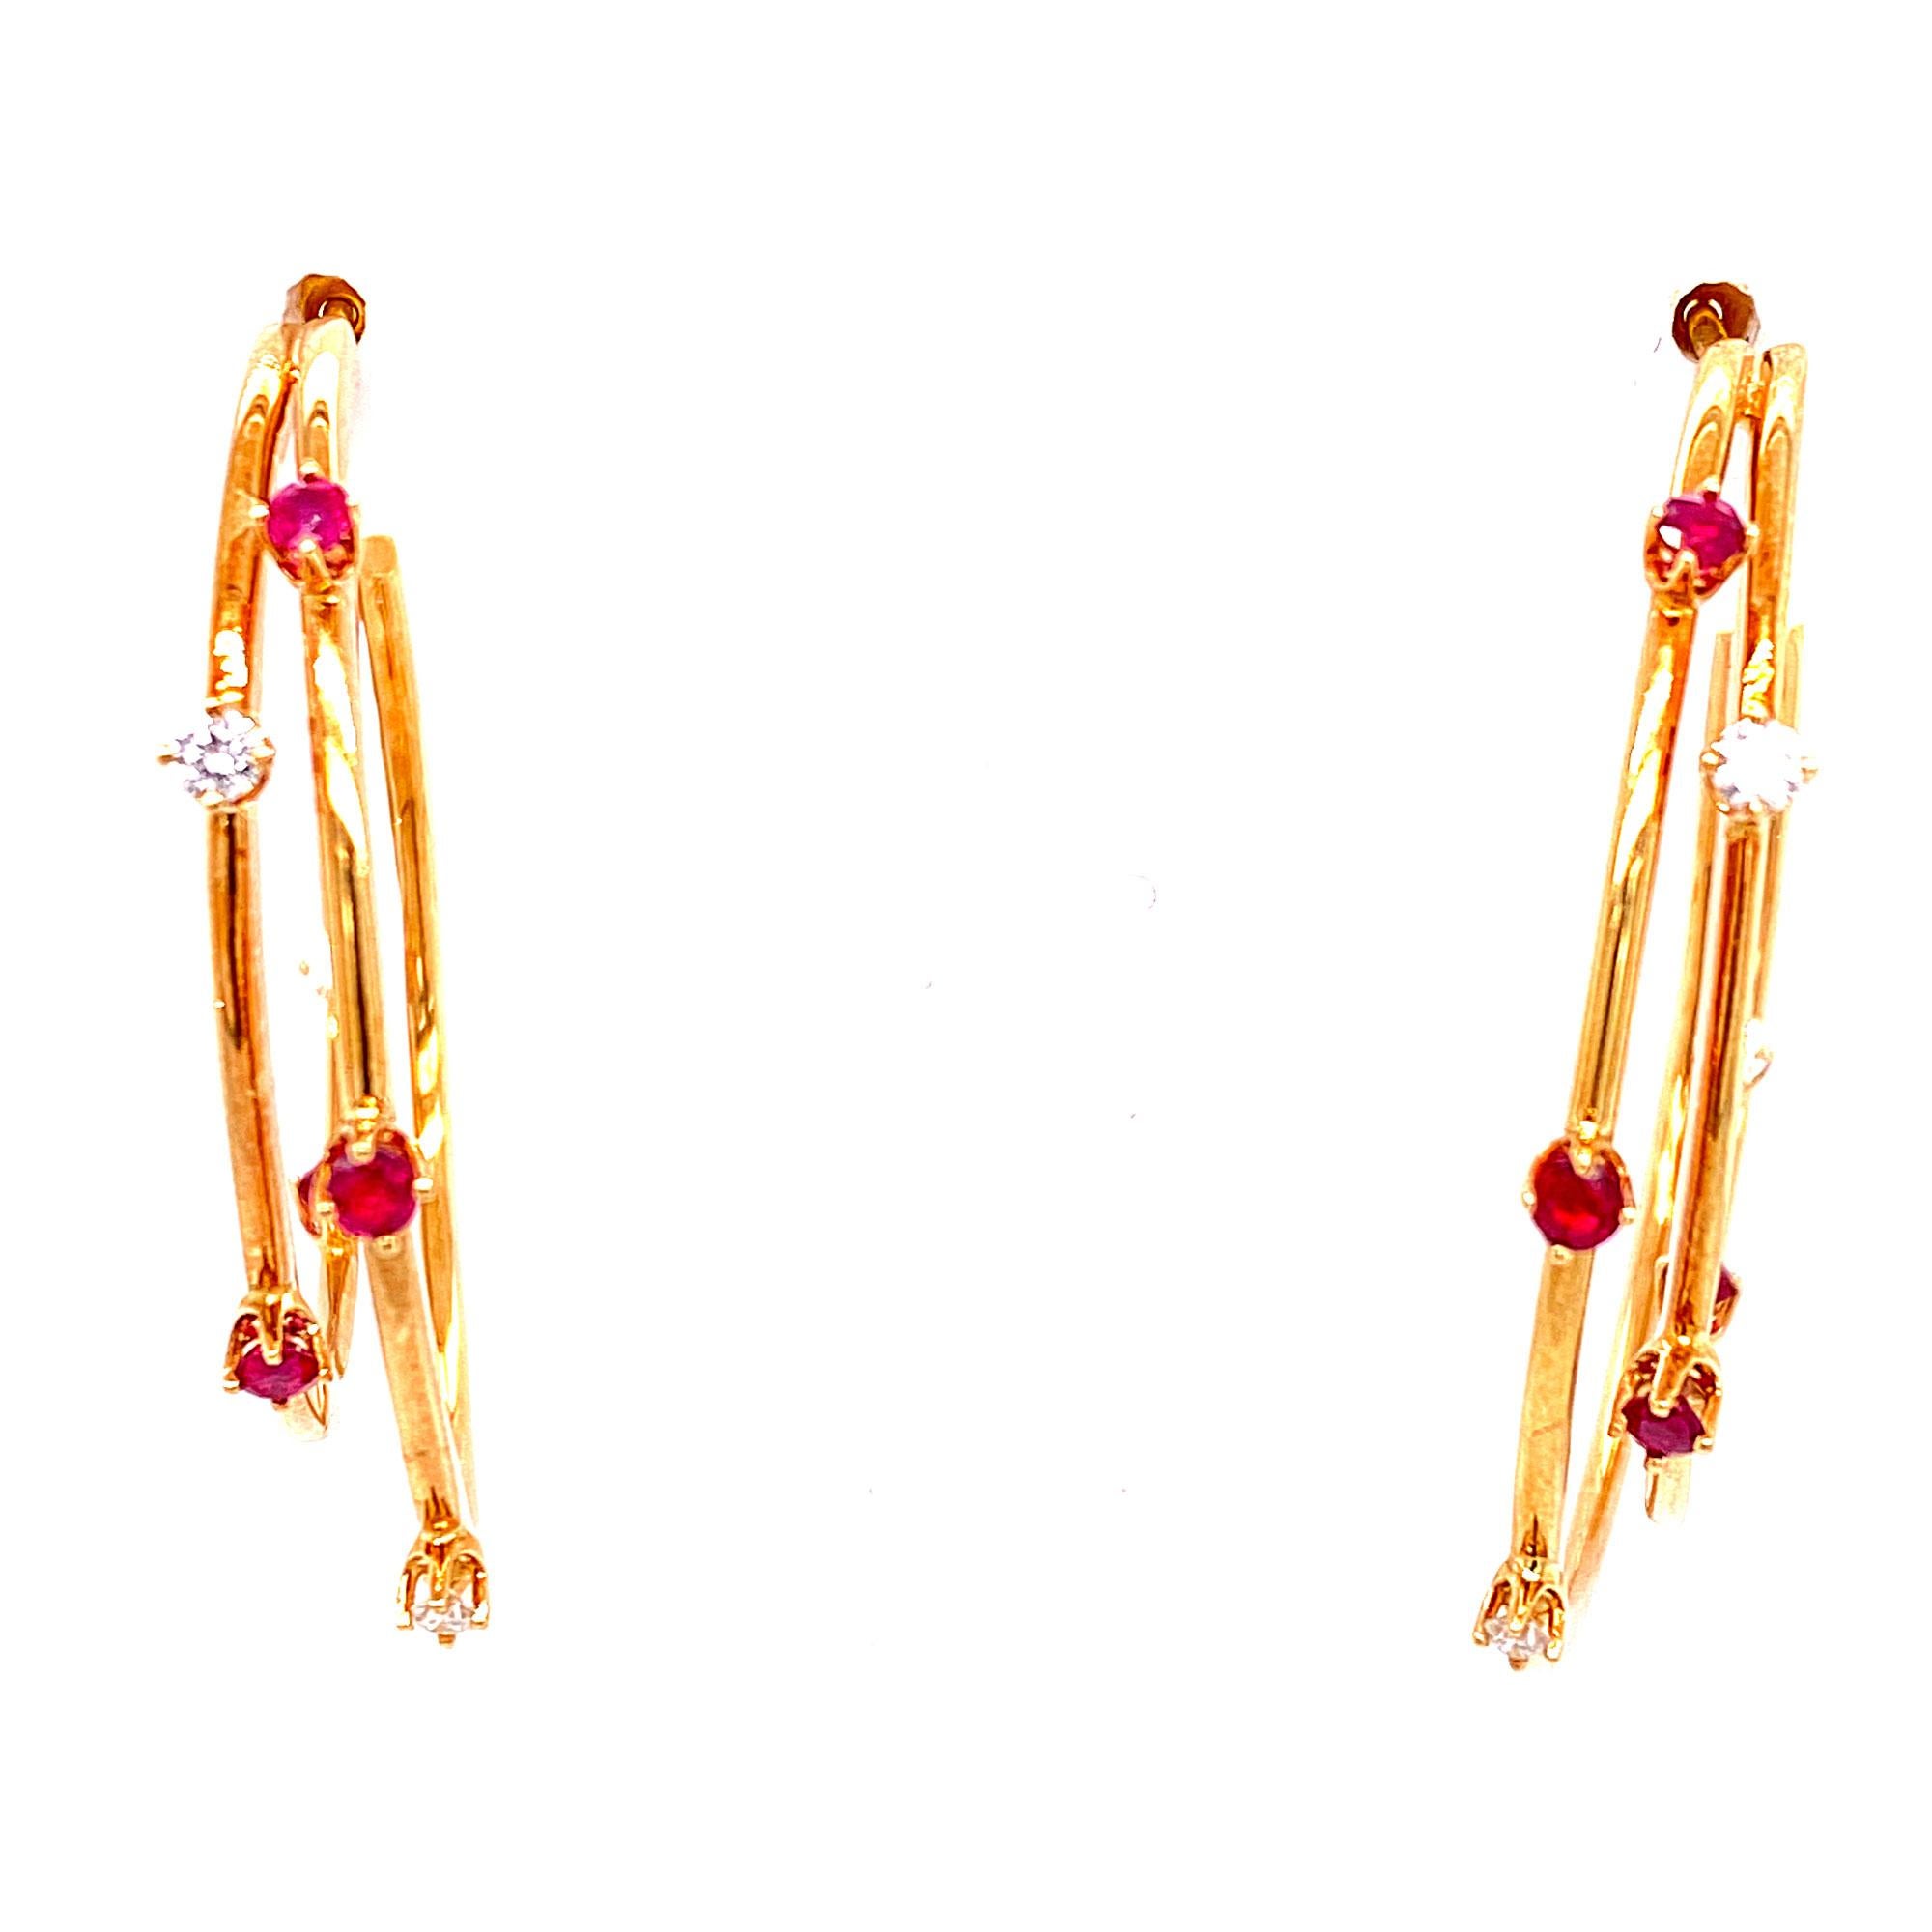 Chic pair of earrings from Tiffany & Co. These vintage hoops are crafted from 18k yellow gold in a fine polished finish and double hoop style, each wire hoop adorned with 8 round cut rubies gemstones and 6 round brilliant cut diamonds. The earrings